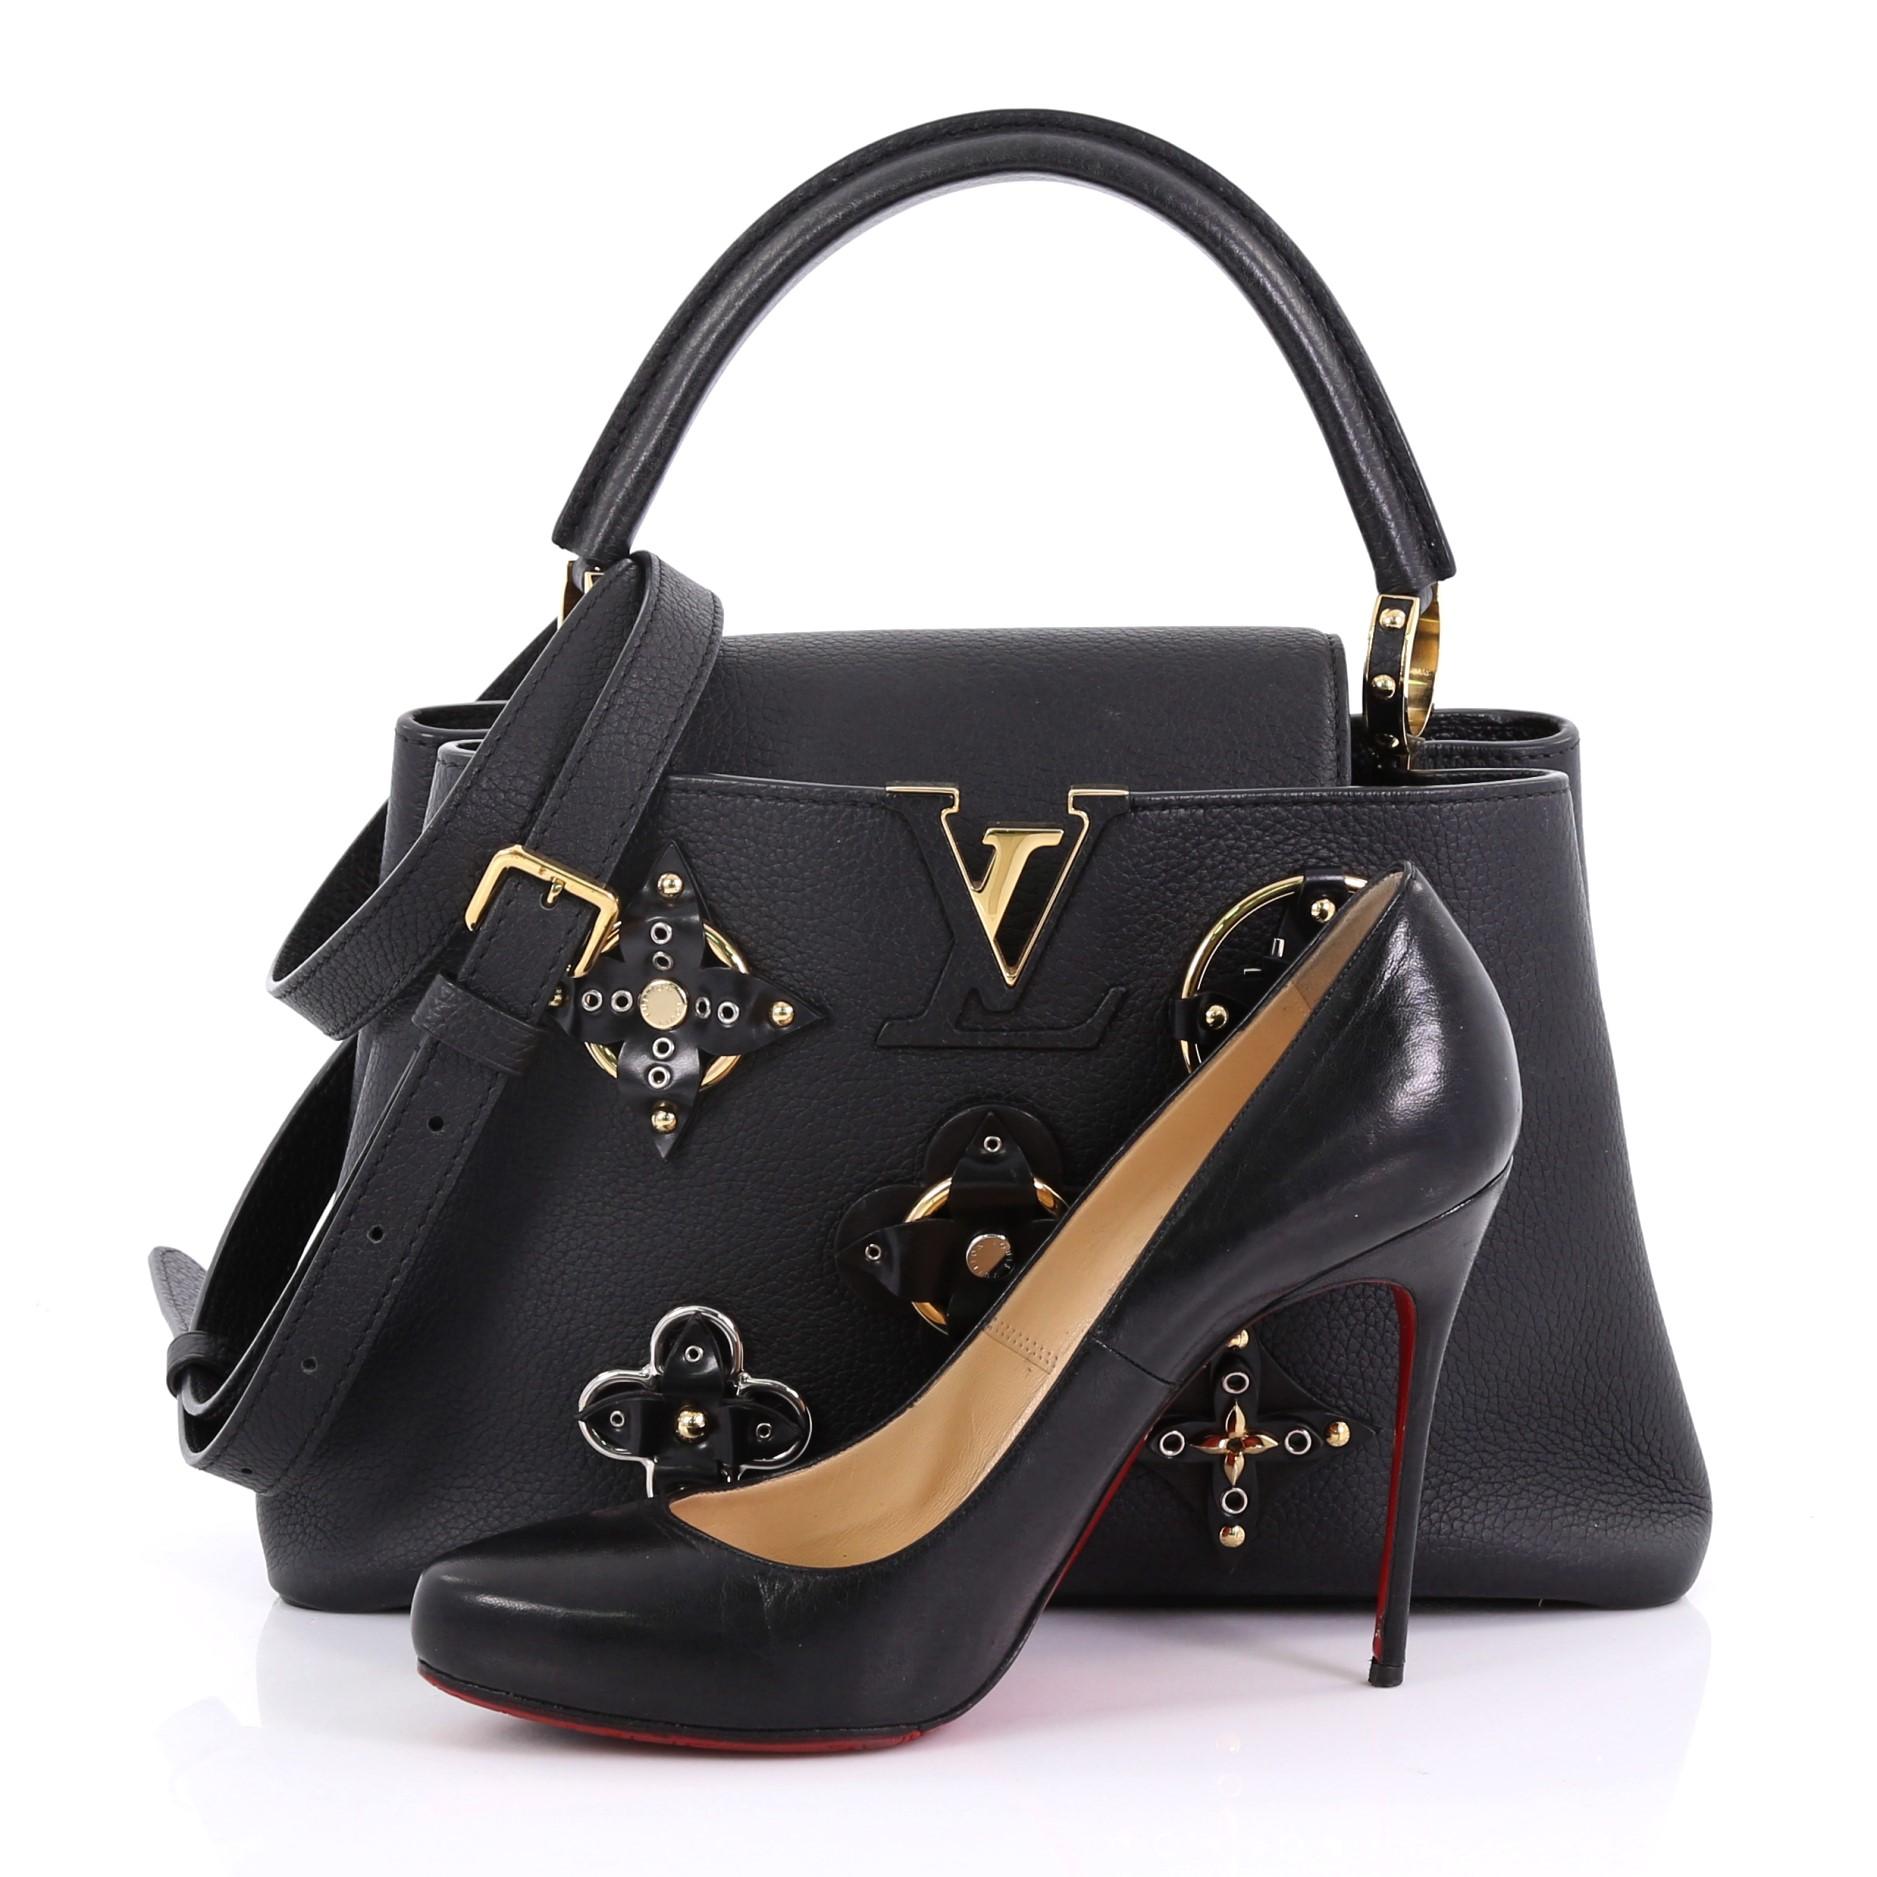 This Louis Vuitton Capucines Handbag Limited Edition Mechanical Flowers Leather PM, crafted in black mechanical flowers leather, features a single loop leather handle, frontal flap, and gold-tone hardware. Its flap can be tucked inside to reveal the